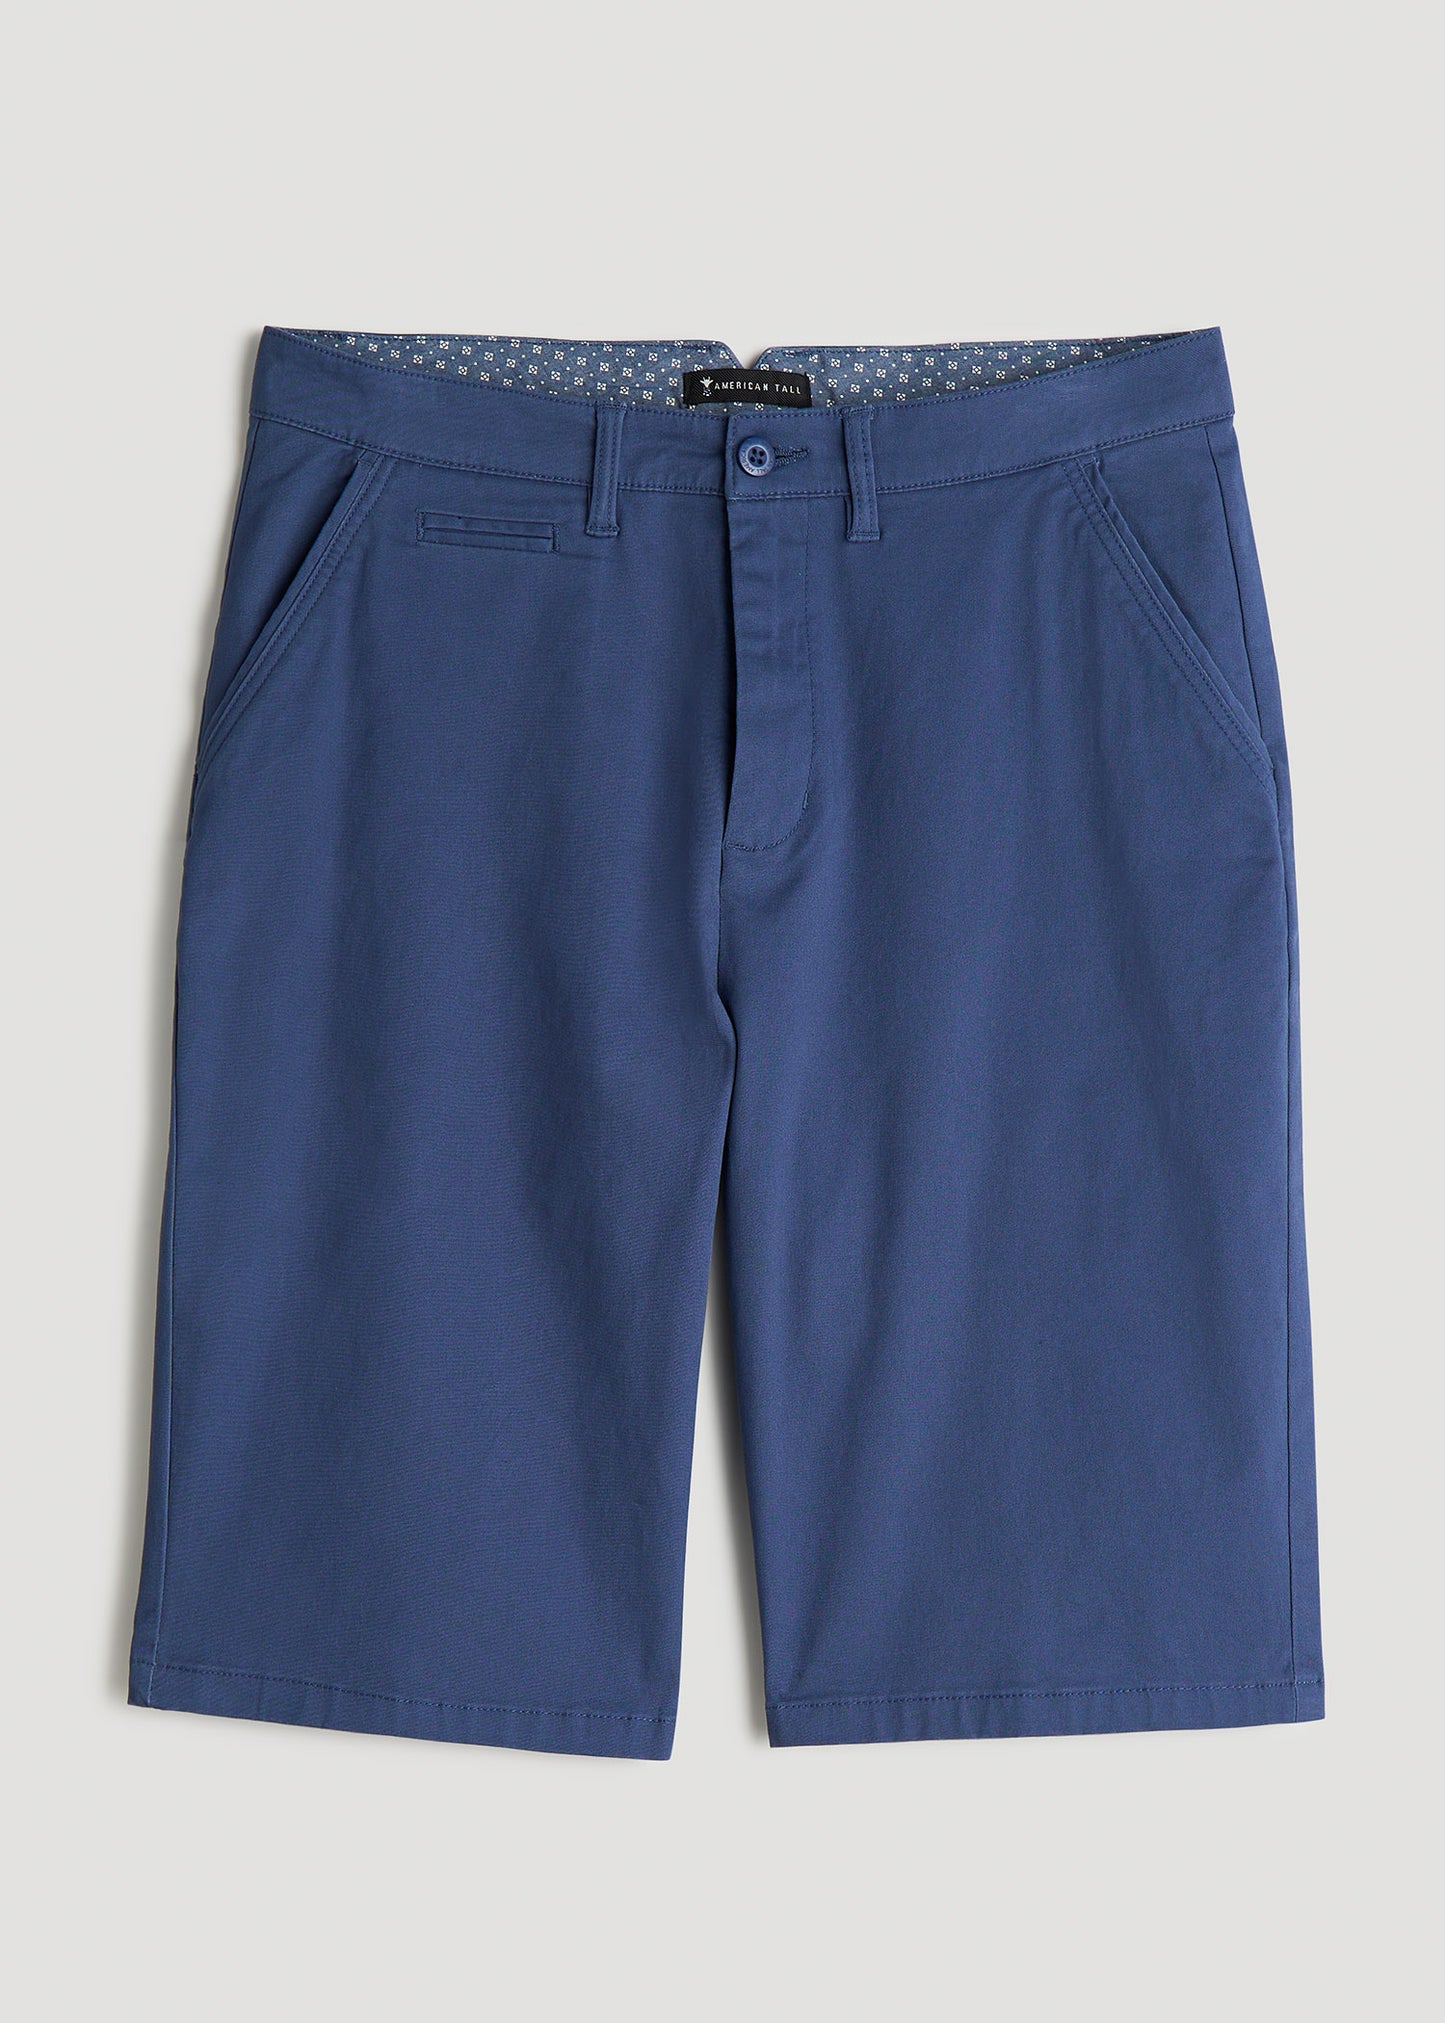 Chino Shorts for Tall Men in Black